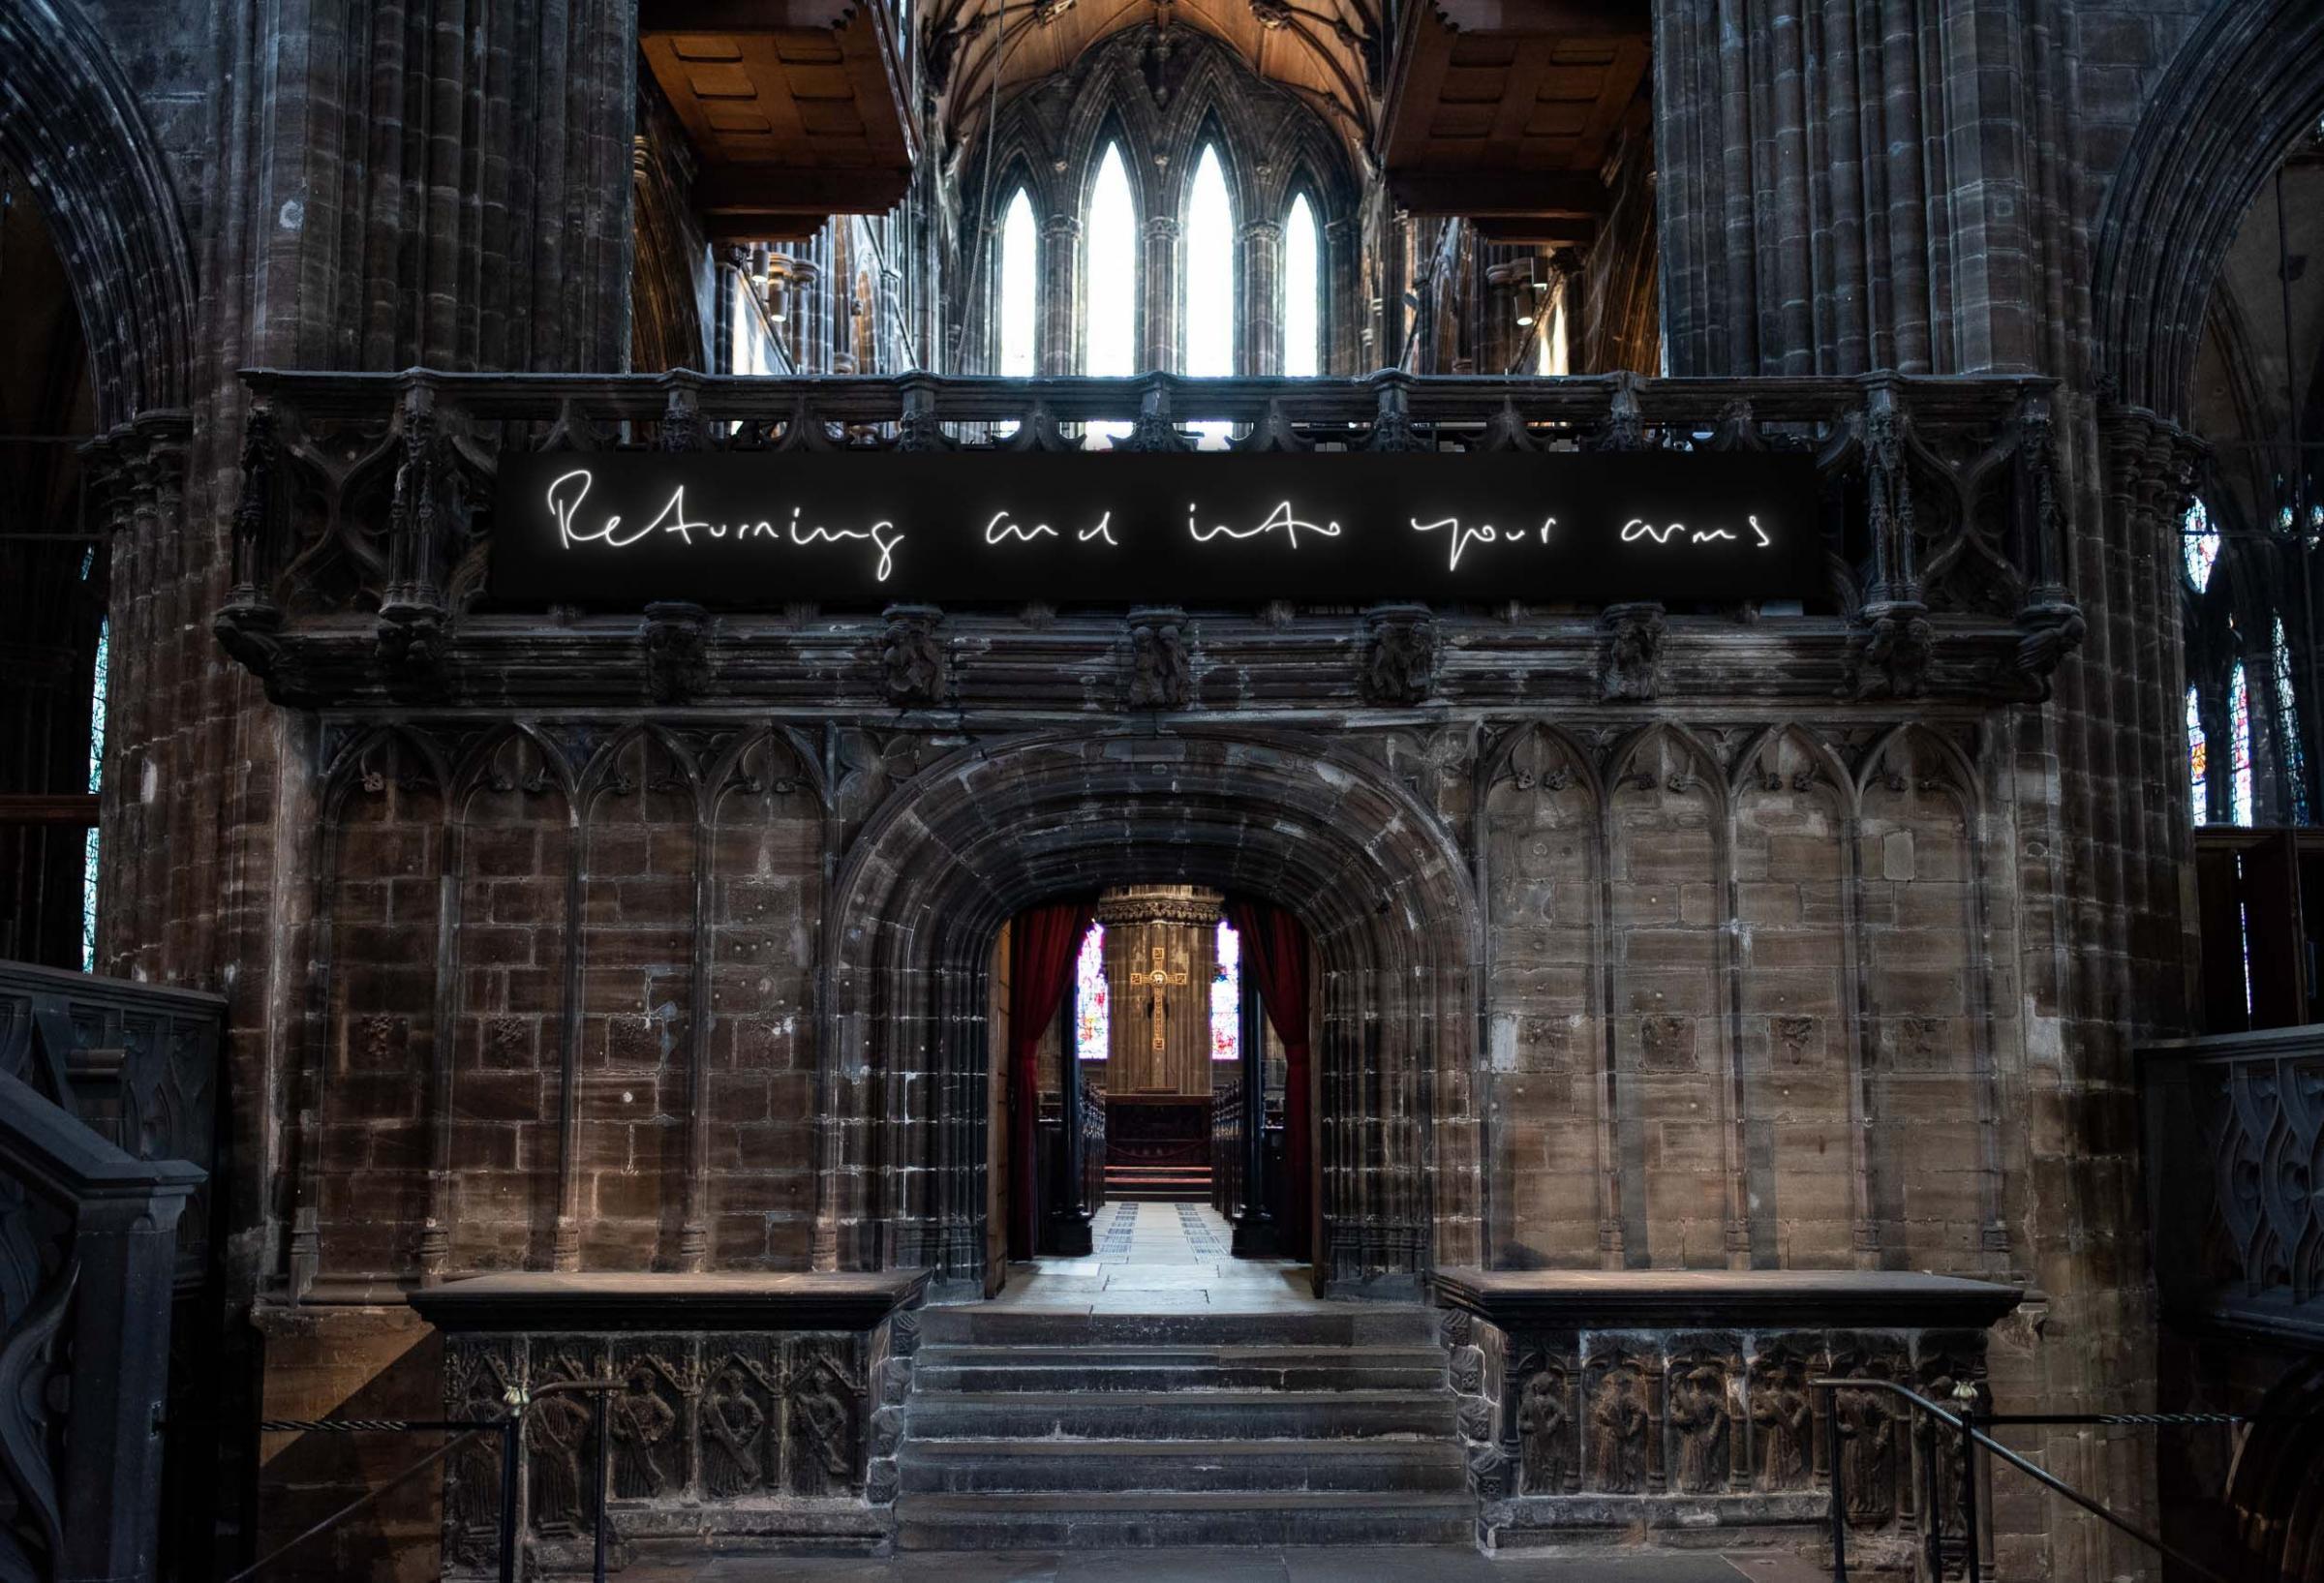 The neon light artwork has been unveiled at Glasgow Cathedral